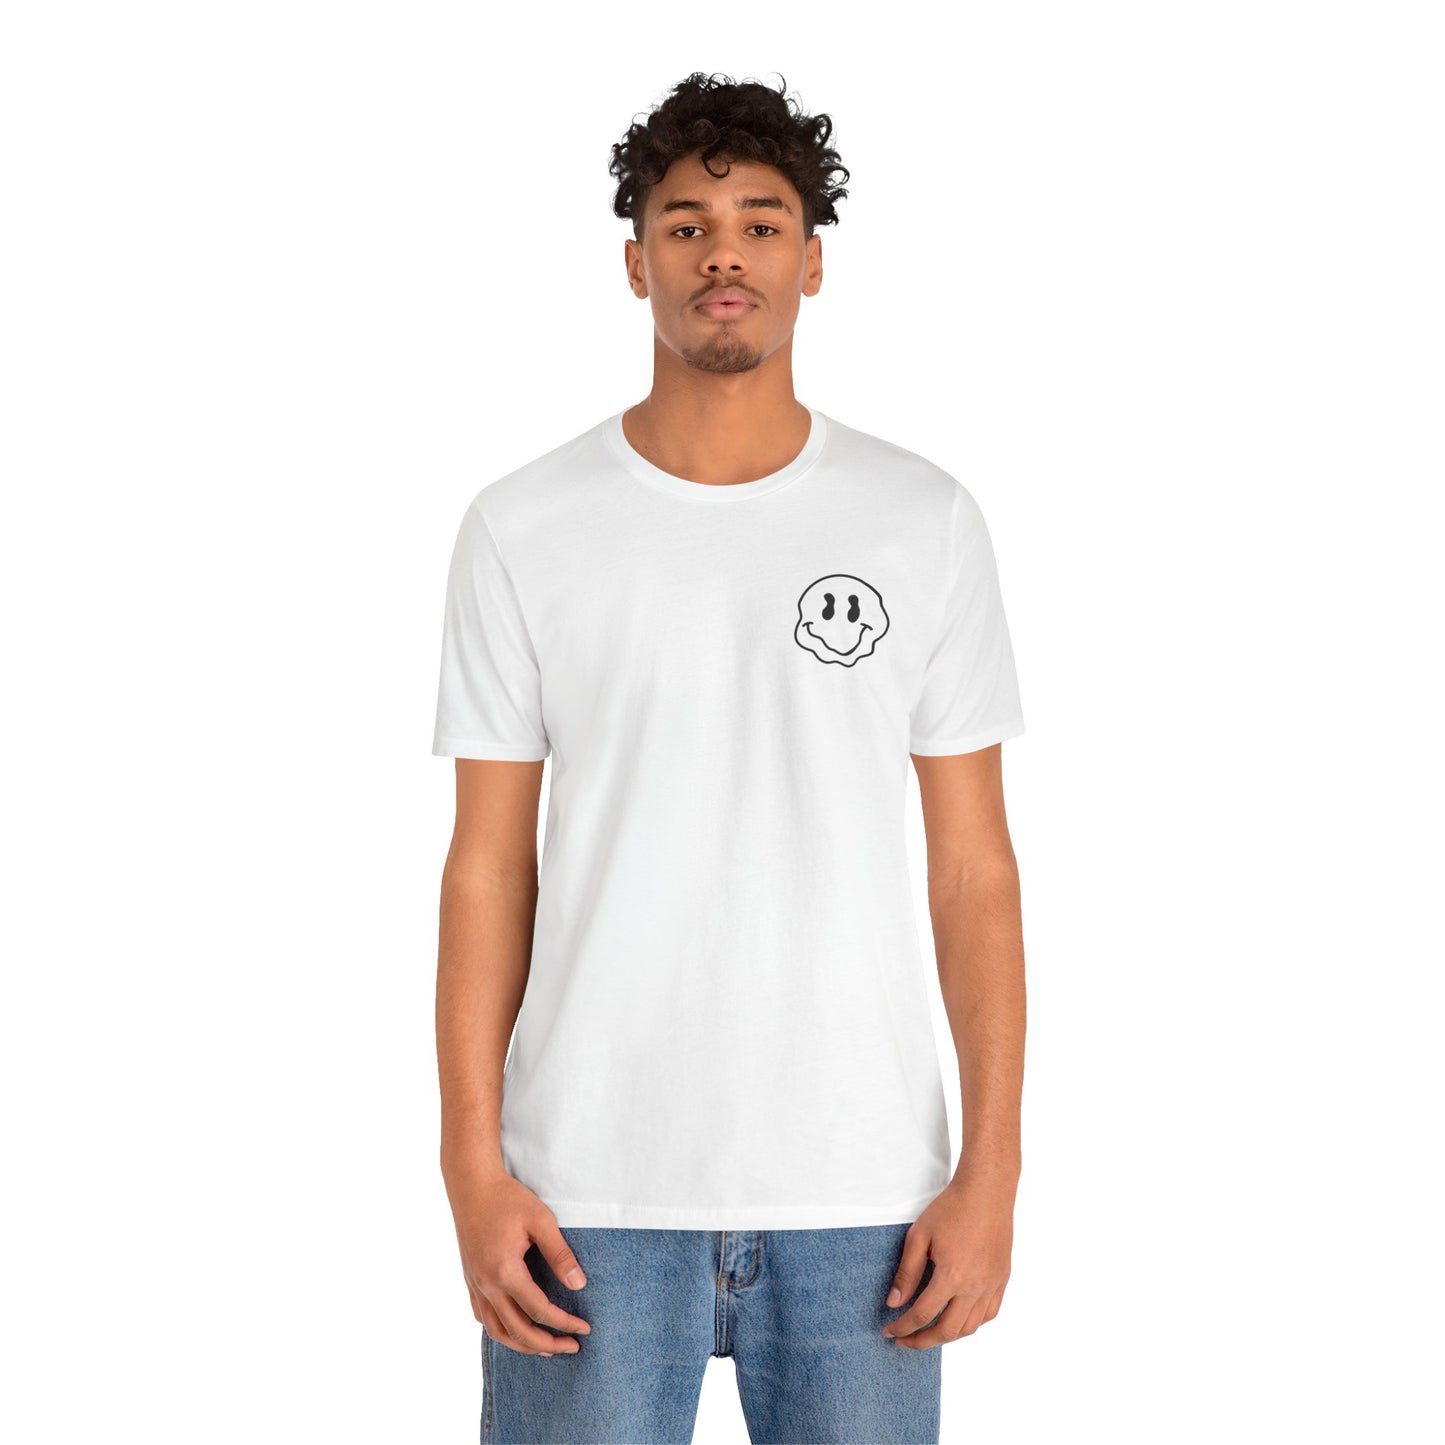 Unclench Your Jaw Short Sleeve Tee